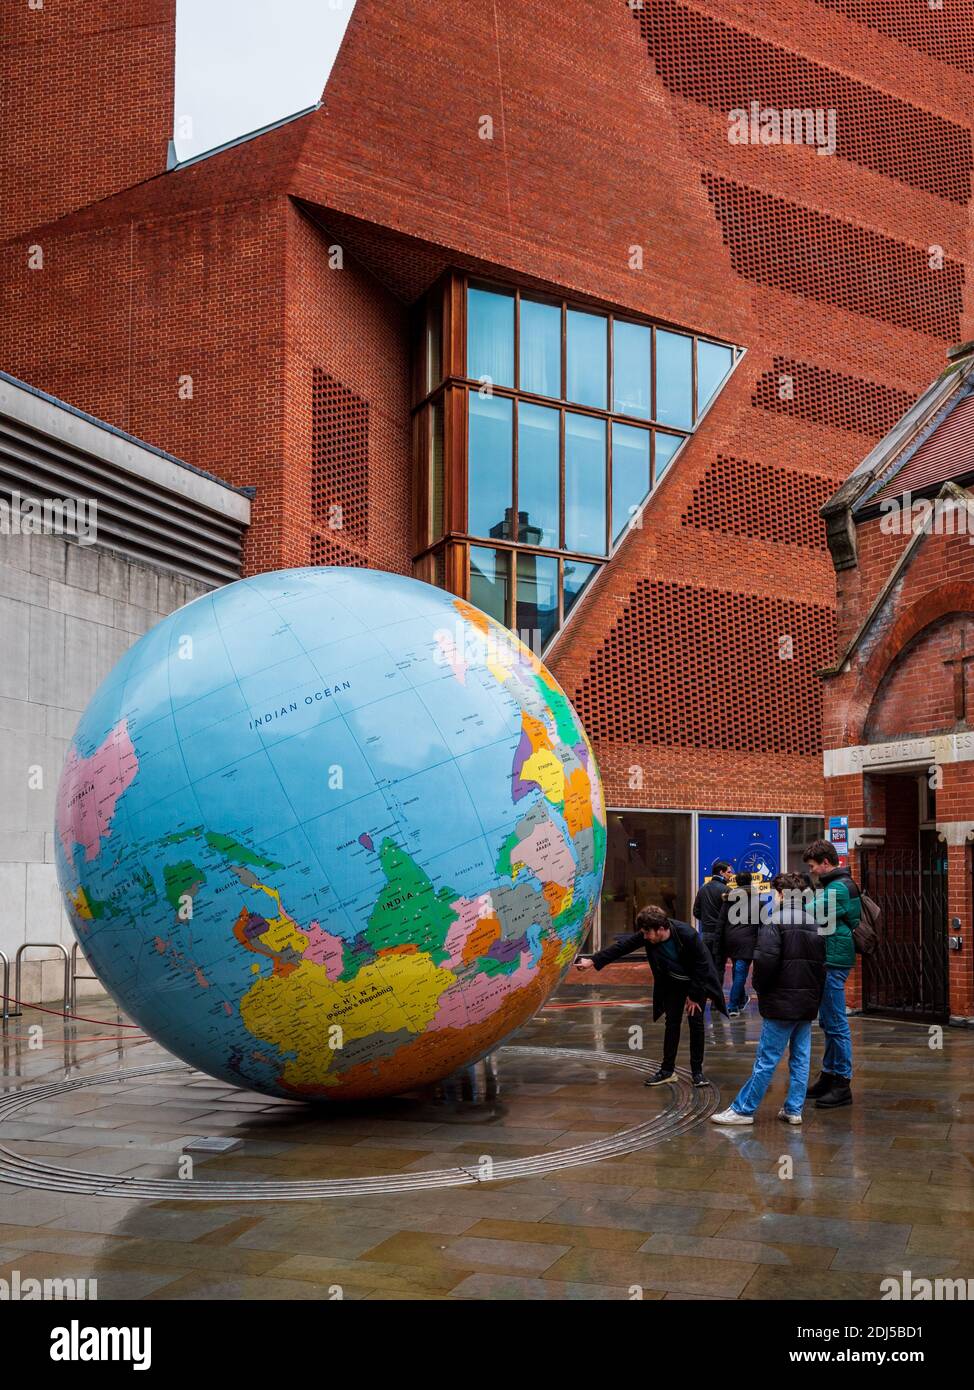 LSE London - large inverted globe at the London School of Economics campus in central London. The World Turned Upside Down sculpture by Mark Wallinger Stock Photo